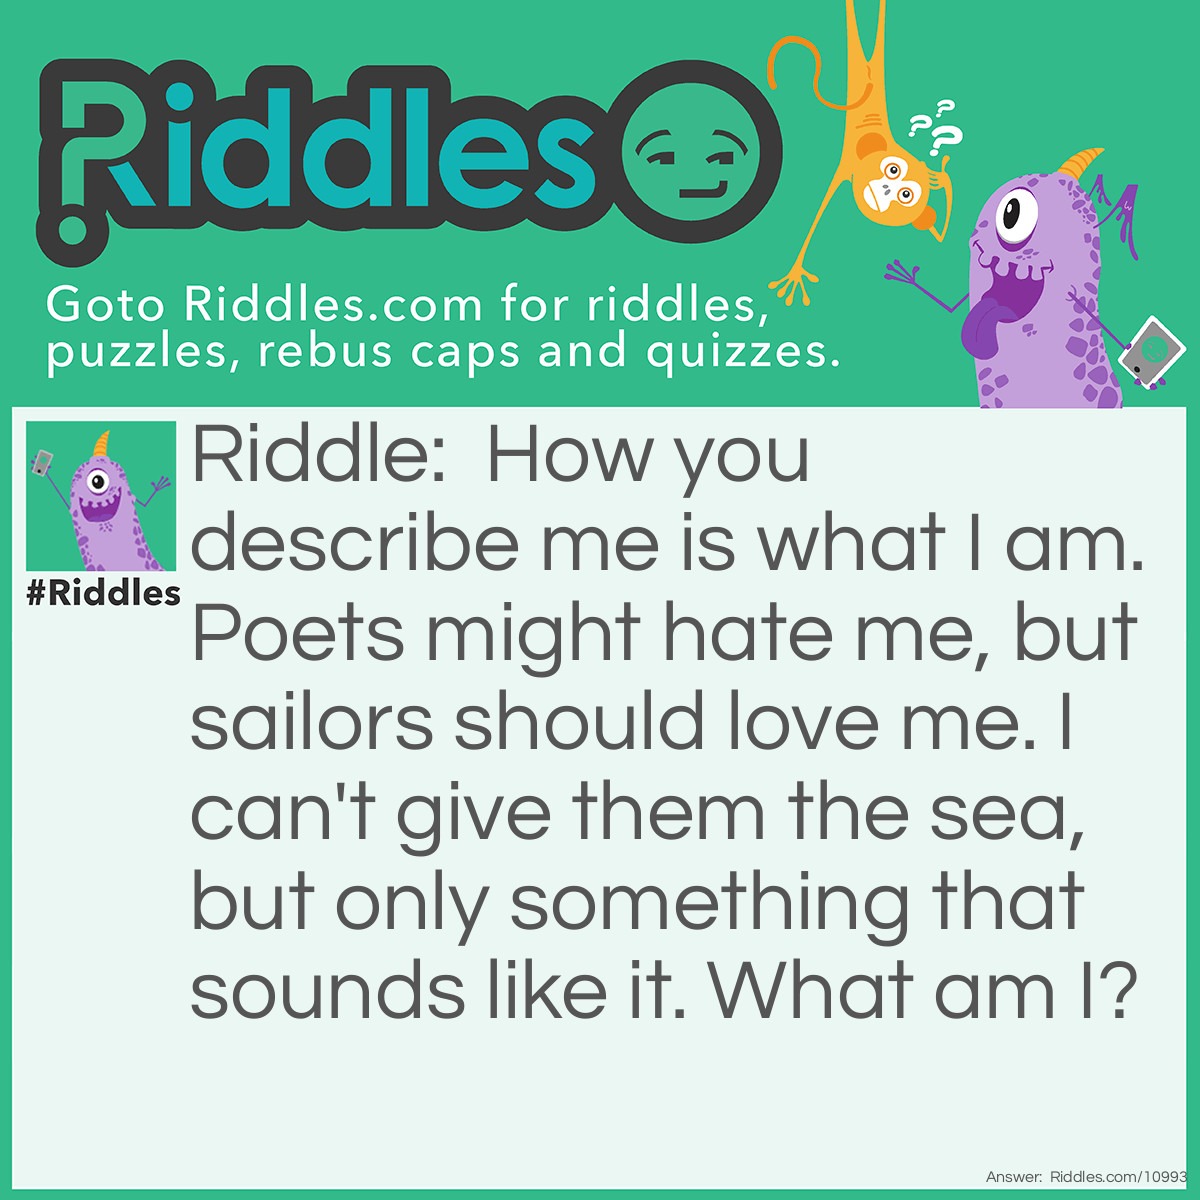 Riddle: How you describe me is what I am. Poets might hate me, but sailors should love me. I can't give them the sea, but only something that sounds like it. What am I? Answer: An orange. (Note: orange doesn't rhyme with anything, and it gives sailors vitamin C (a homophone of sea))